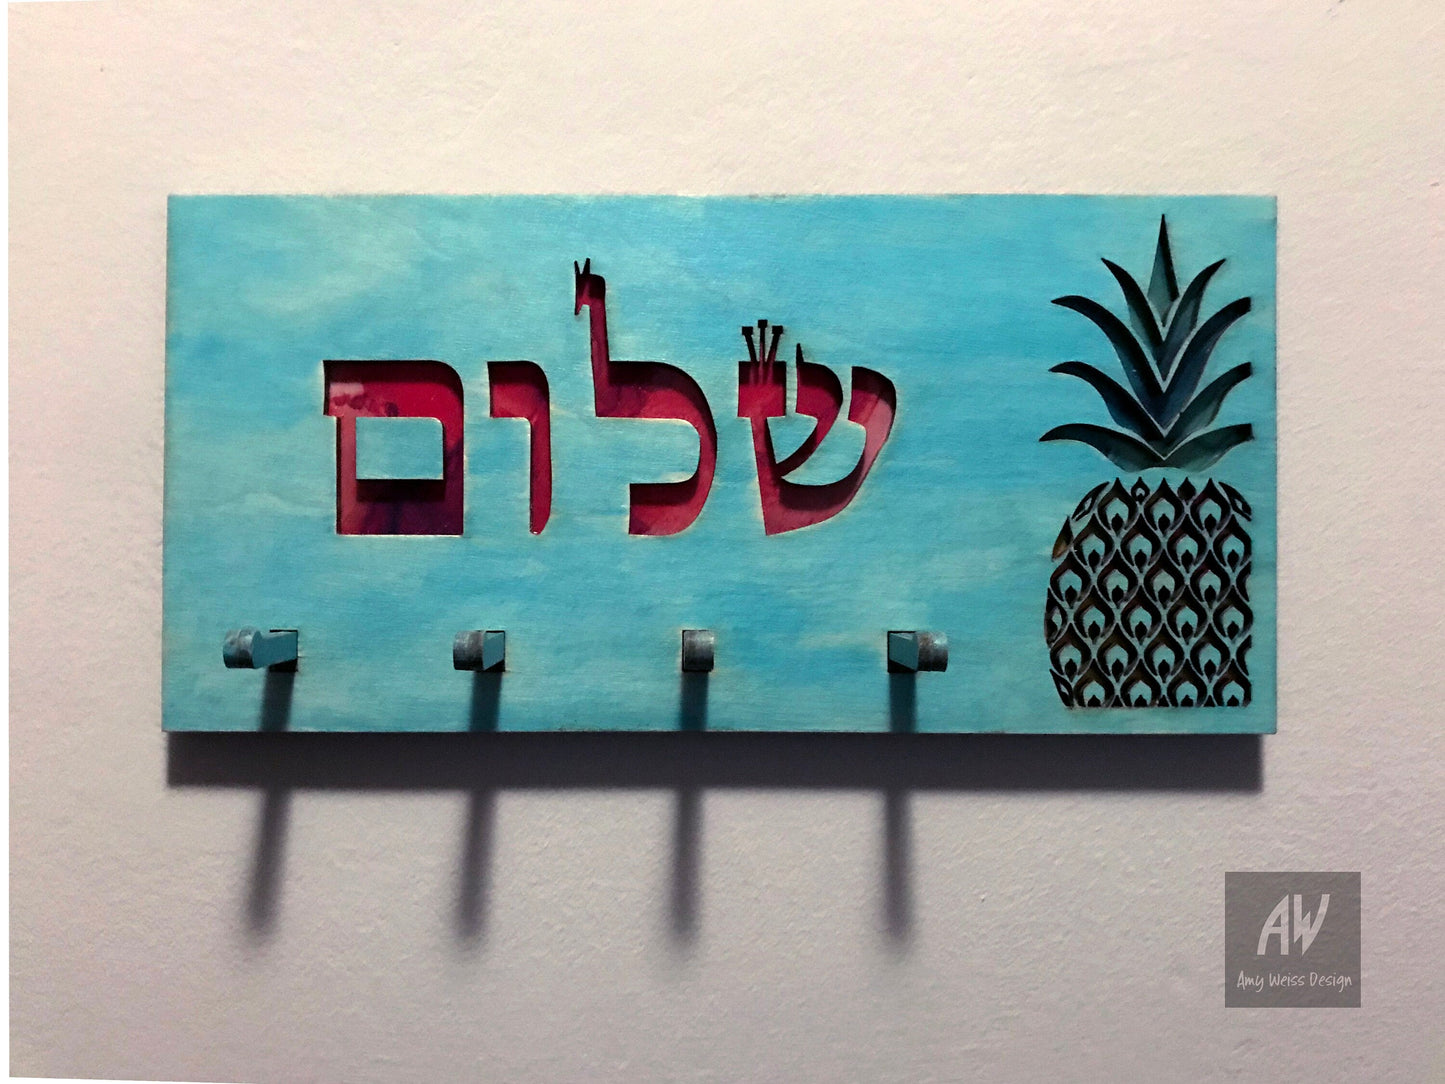 Blue stained wood keyholder with hebrew cutout letters "Shalom", 4 pegs for keys, and a pineapple.